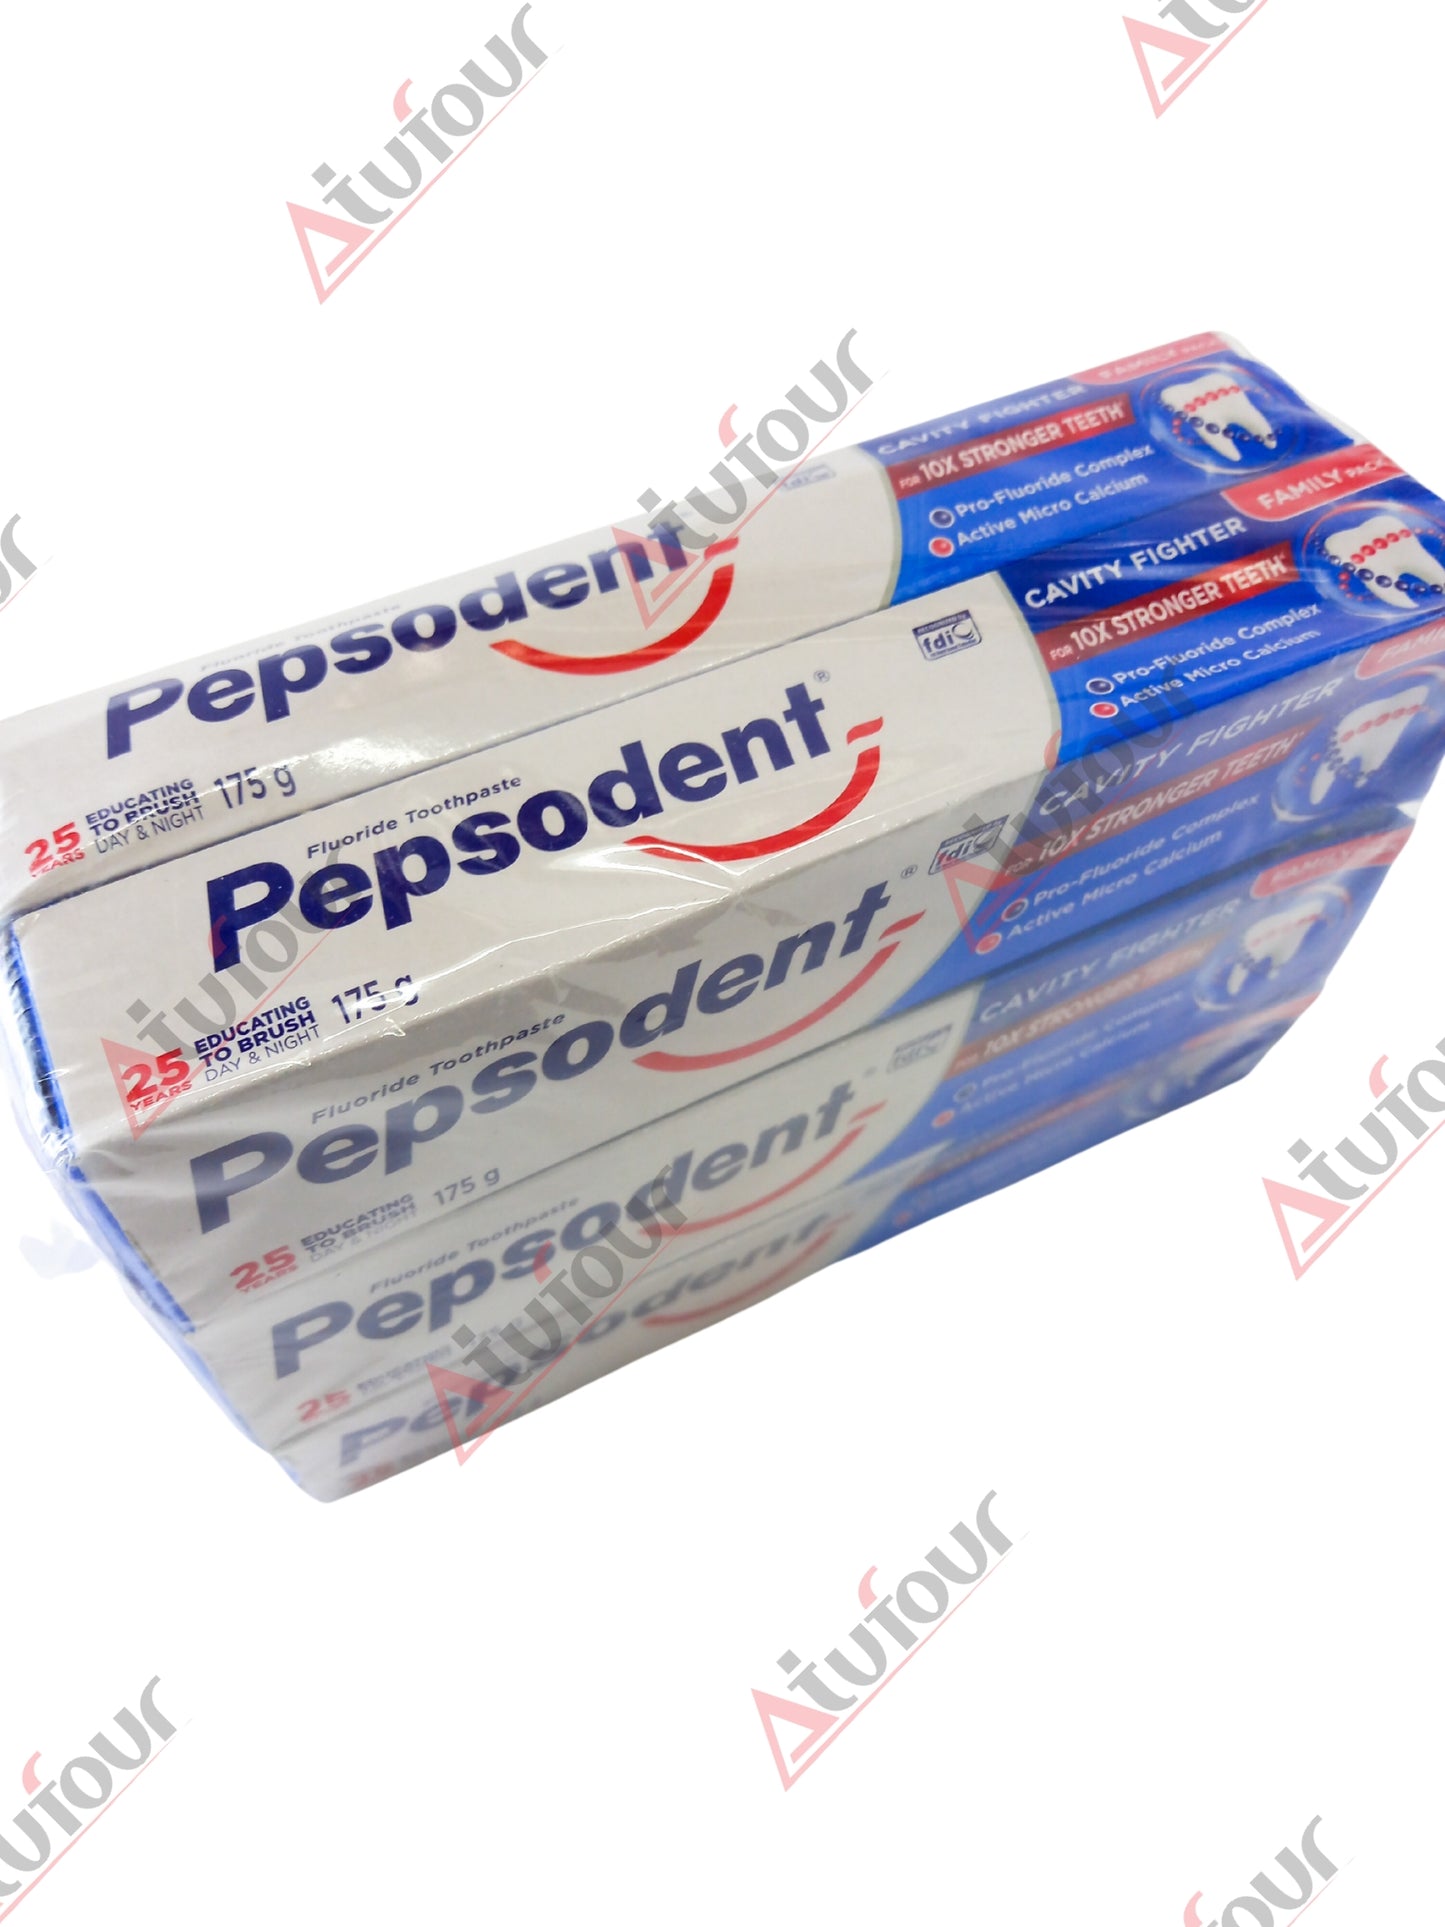 Pepsodent Toothpaste 175g